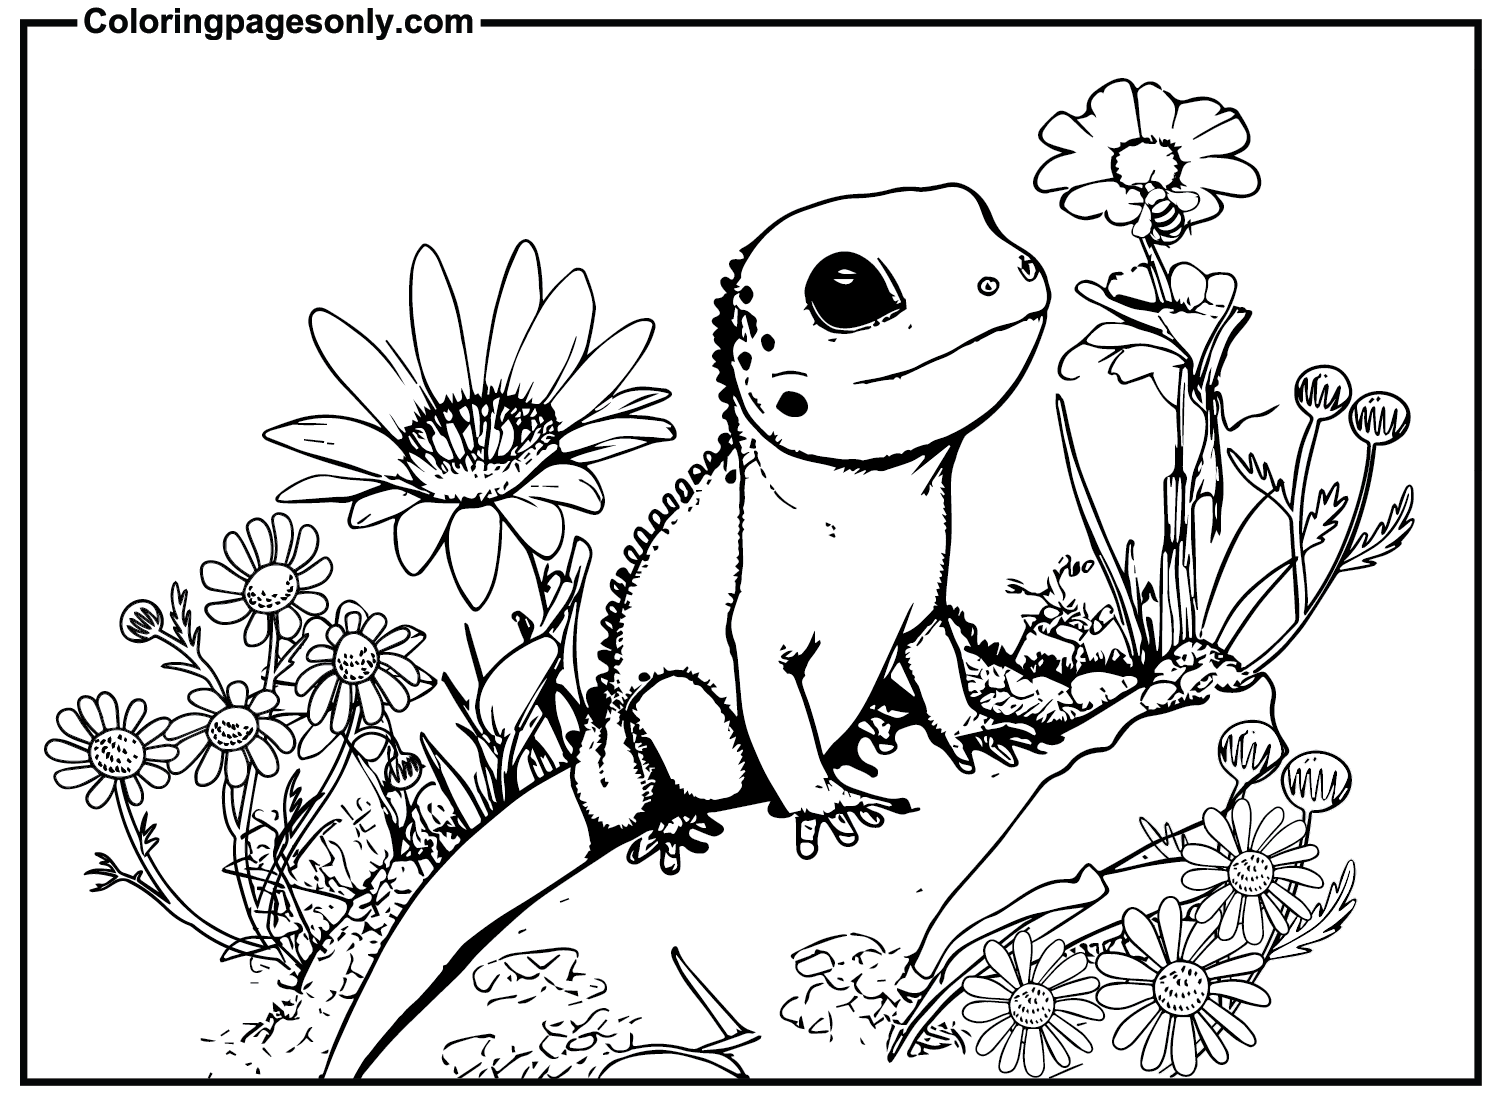 Skink Pictures Coloring Page - Free Printable Coloring Pages